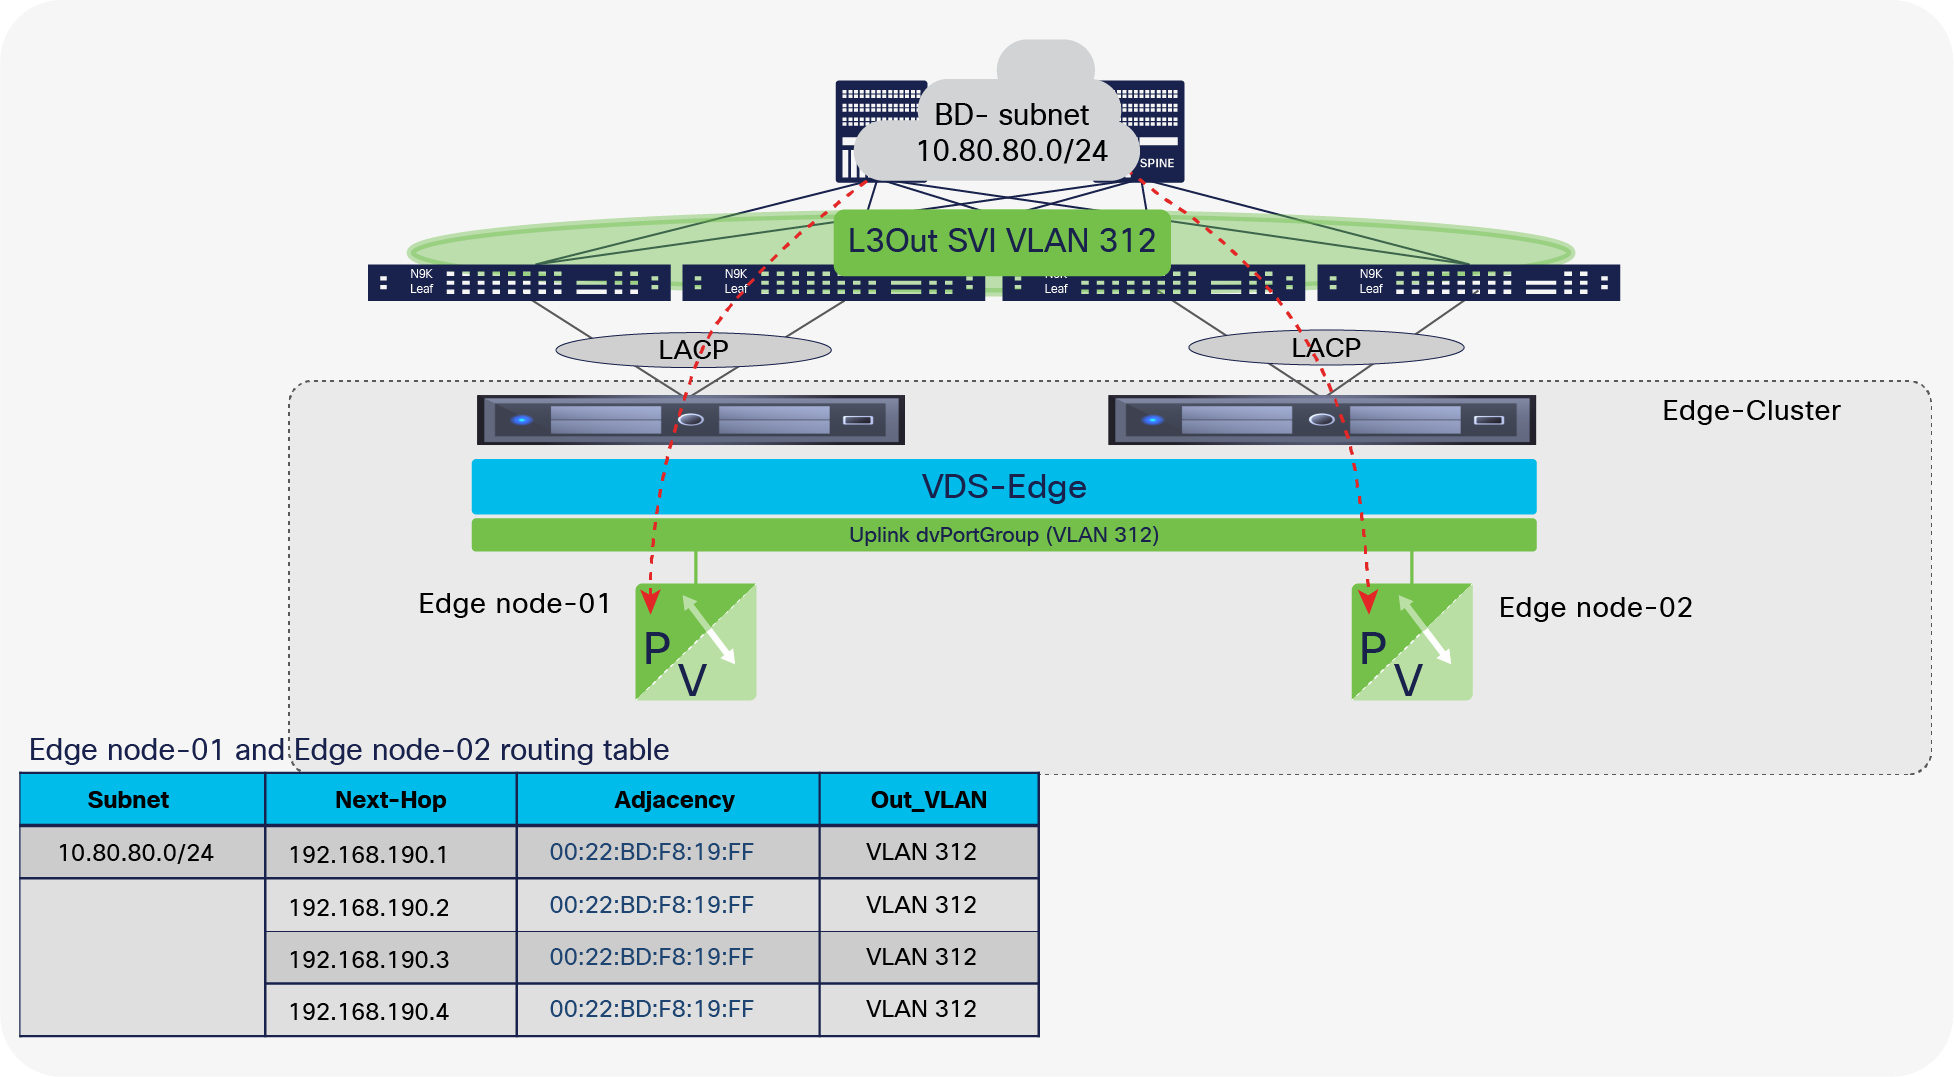 An example of the routing and forwarding table for Edge node-01 and Edge node-02 when peering with a Cisco ACI SVI L3Out